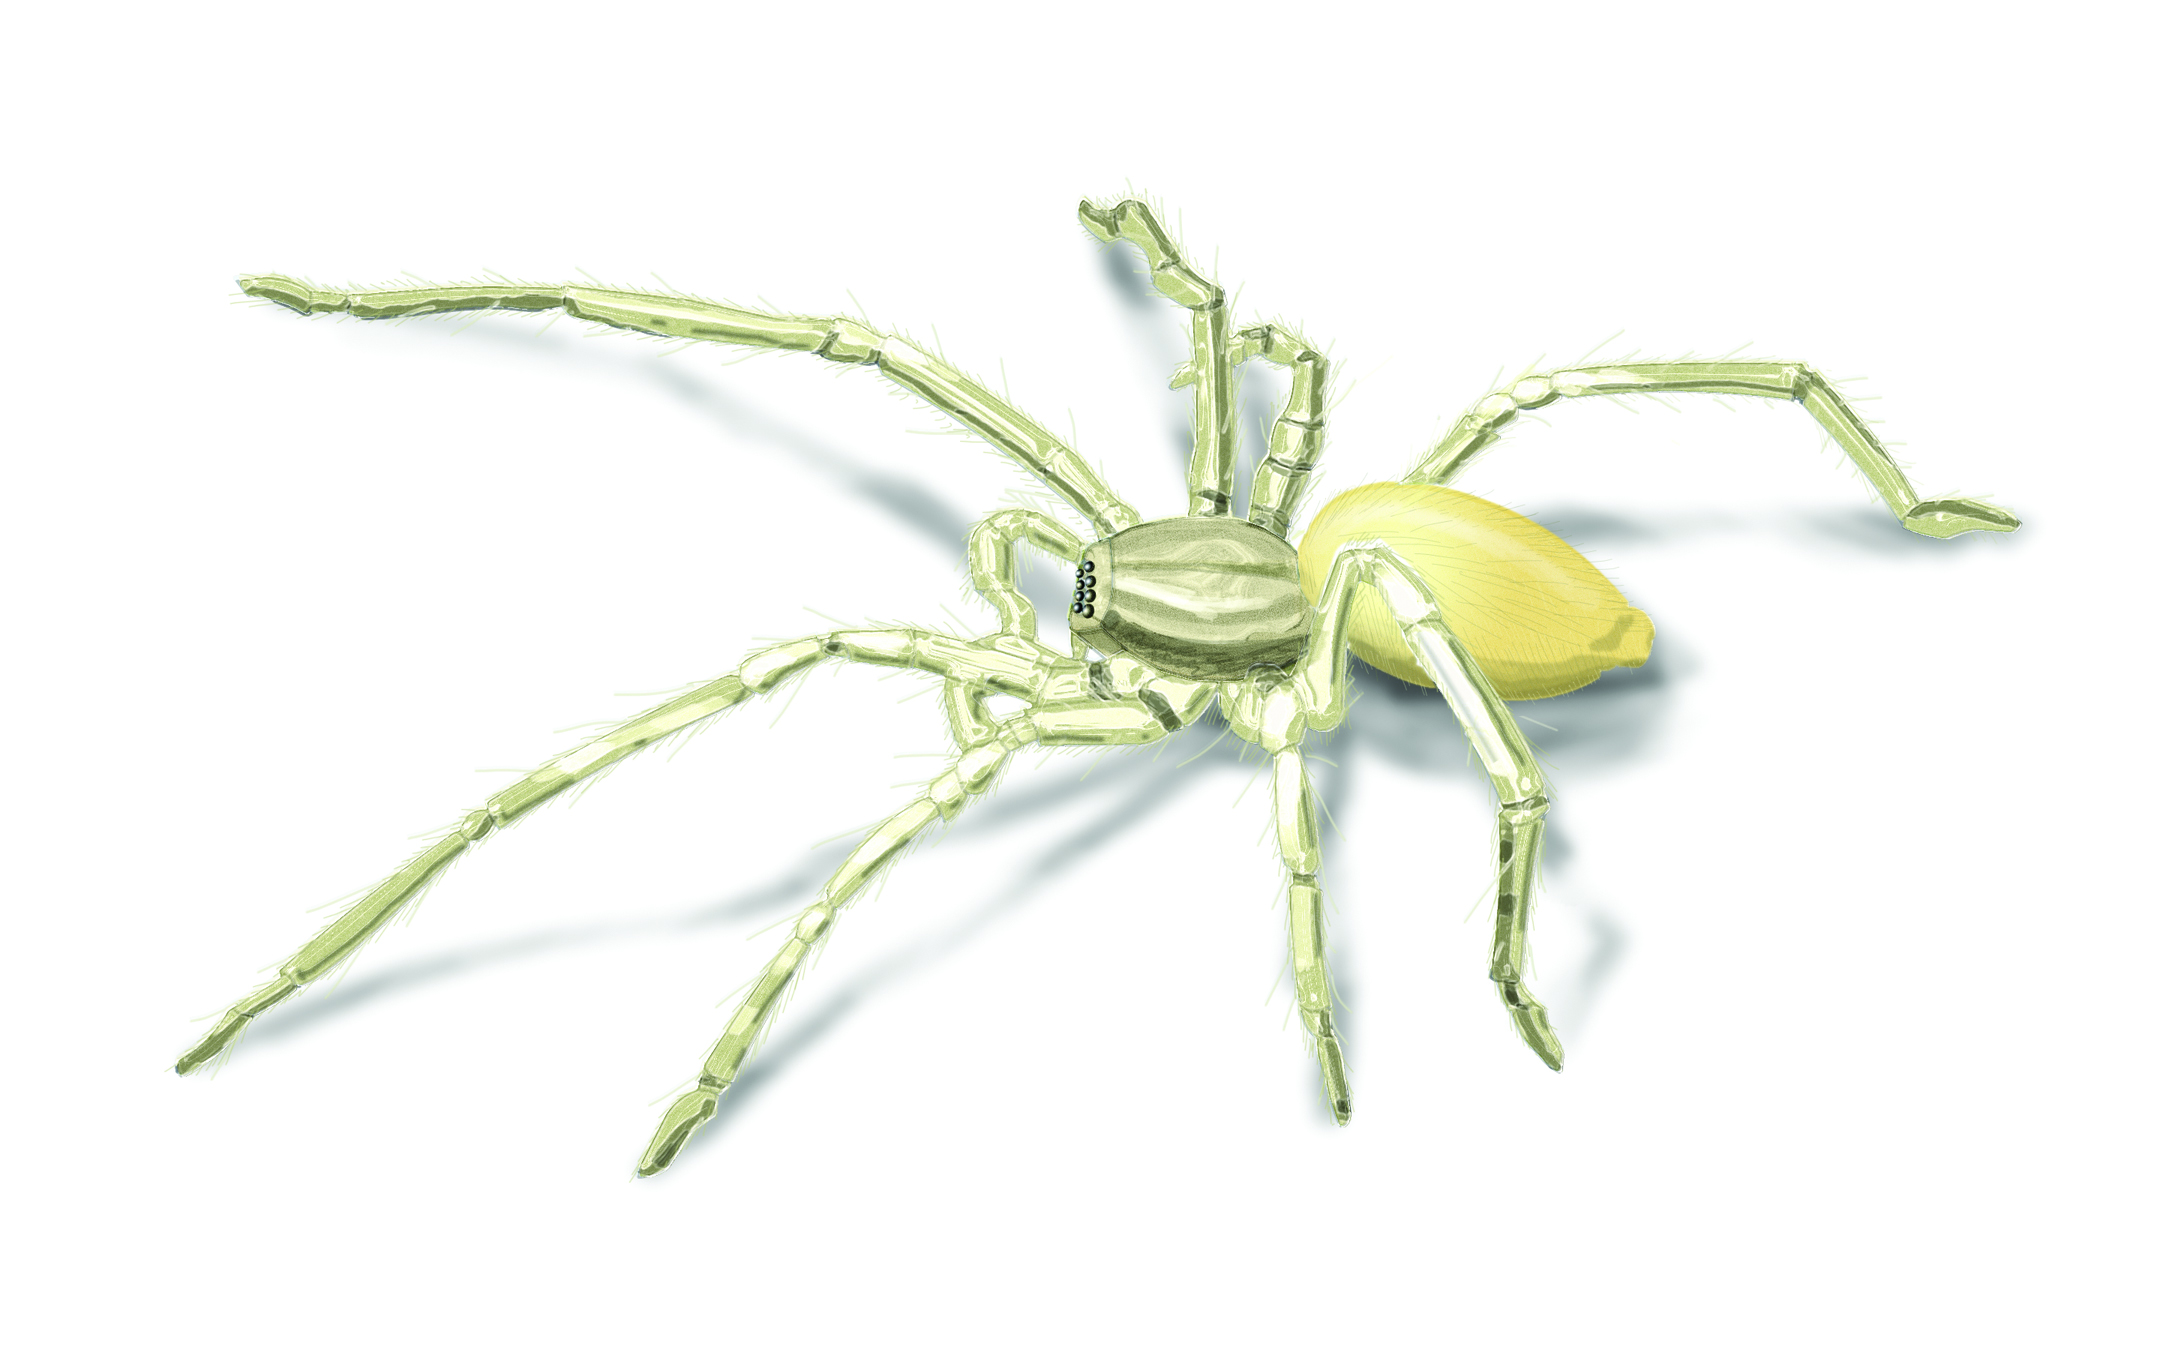 Yellow Sac Spiders: Get Rid of Yellow Sac Spider Infestation